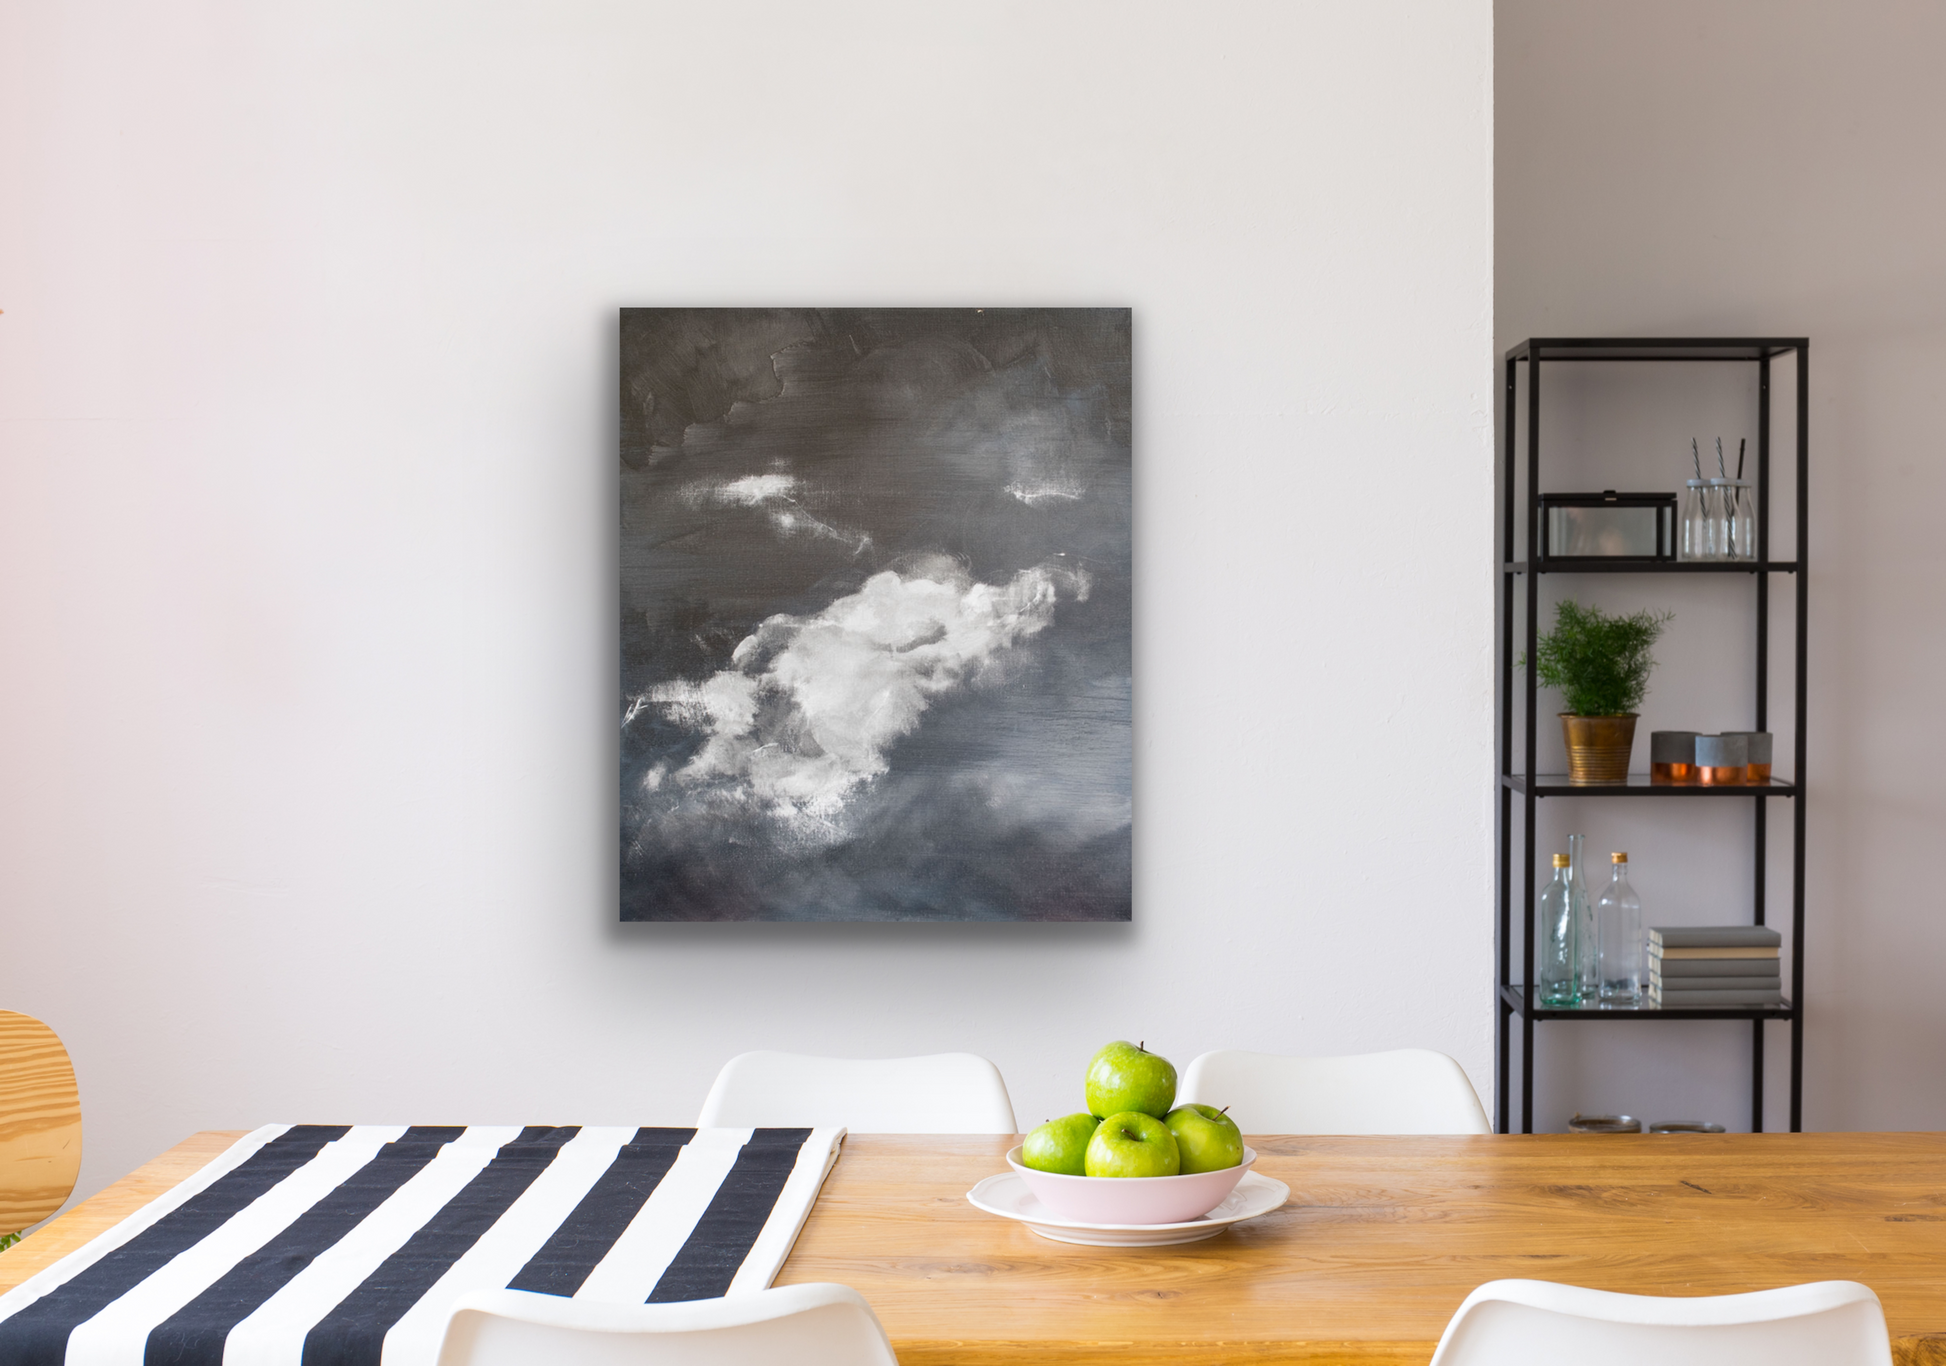 "Mono Cloud III" will look great in any room of your home.